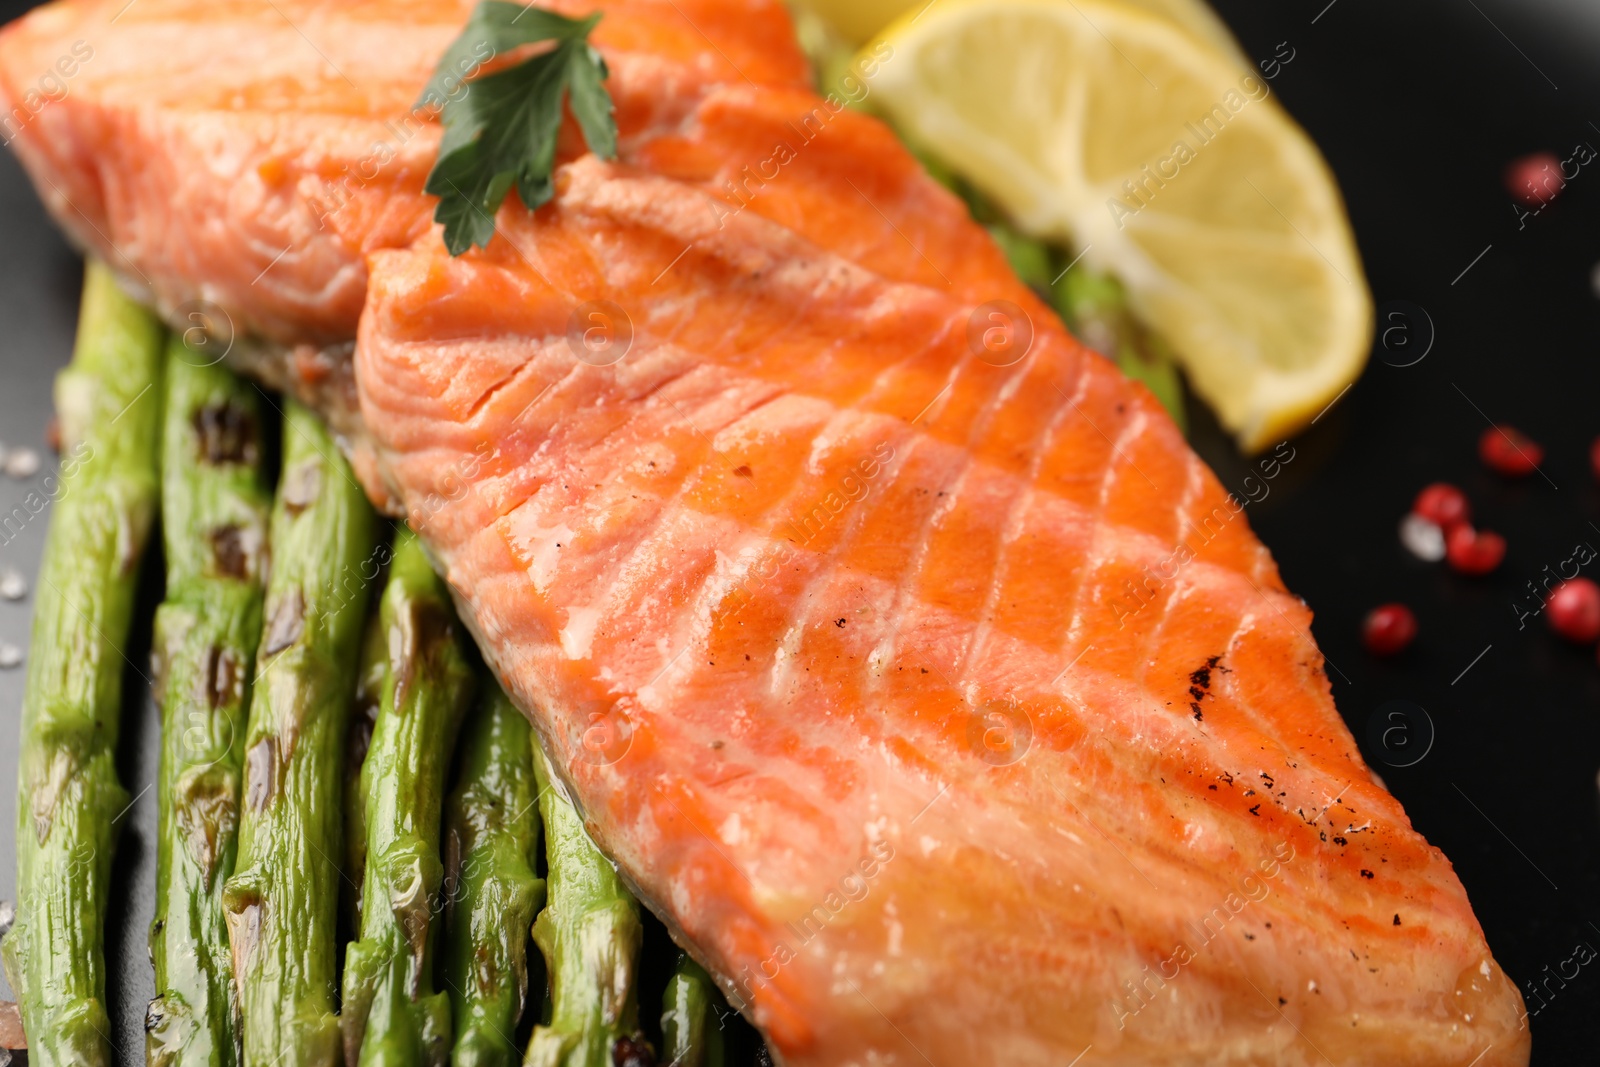 Photo of Tasty grilled salmon with asparagus and spices on plate, closeup